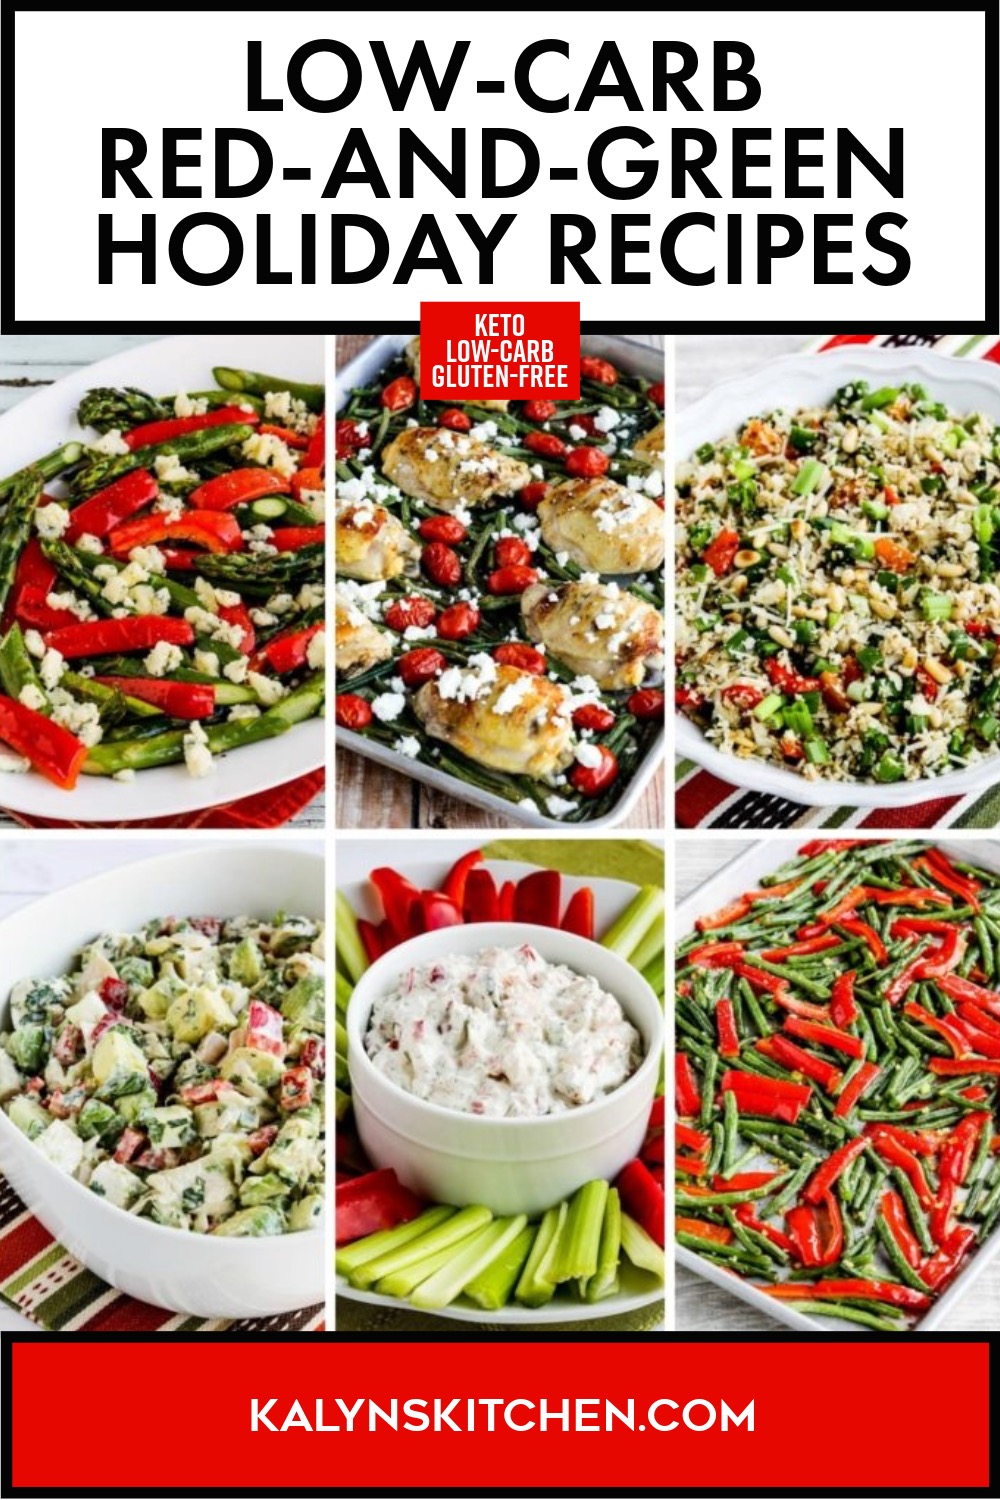 https://kalynskitchen.com/wp-content/uploads/2021/12/LOW-CARB-RED-AND-GREEN-HOLIDAY-RECIPES.jpeg